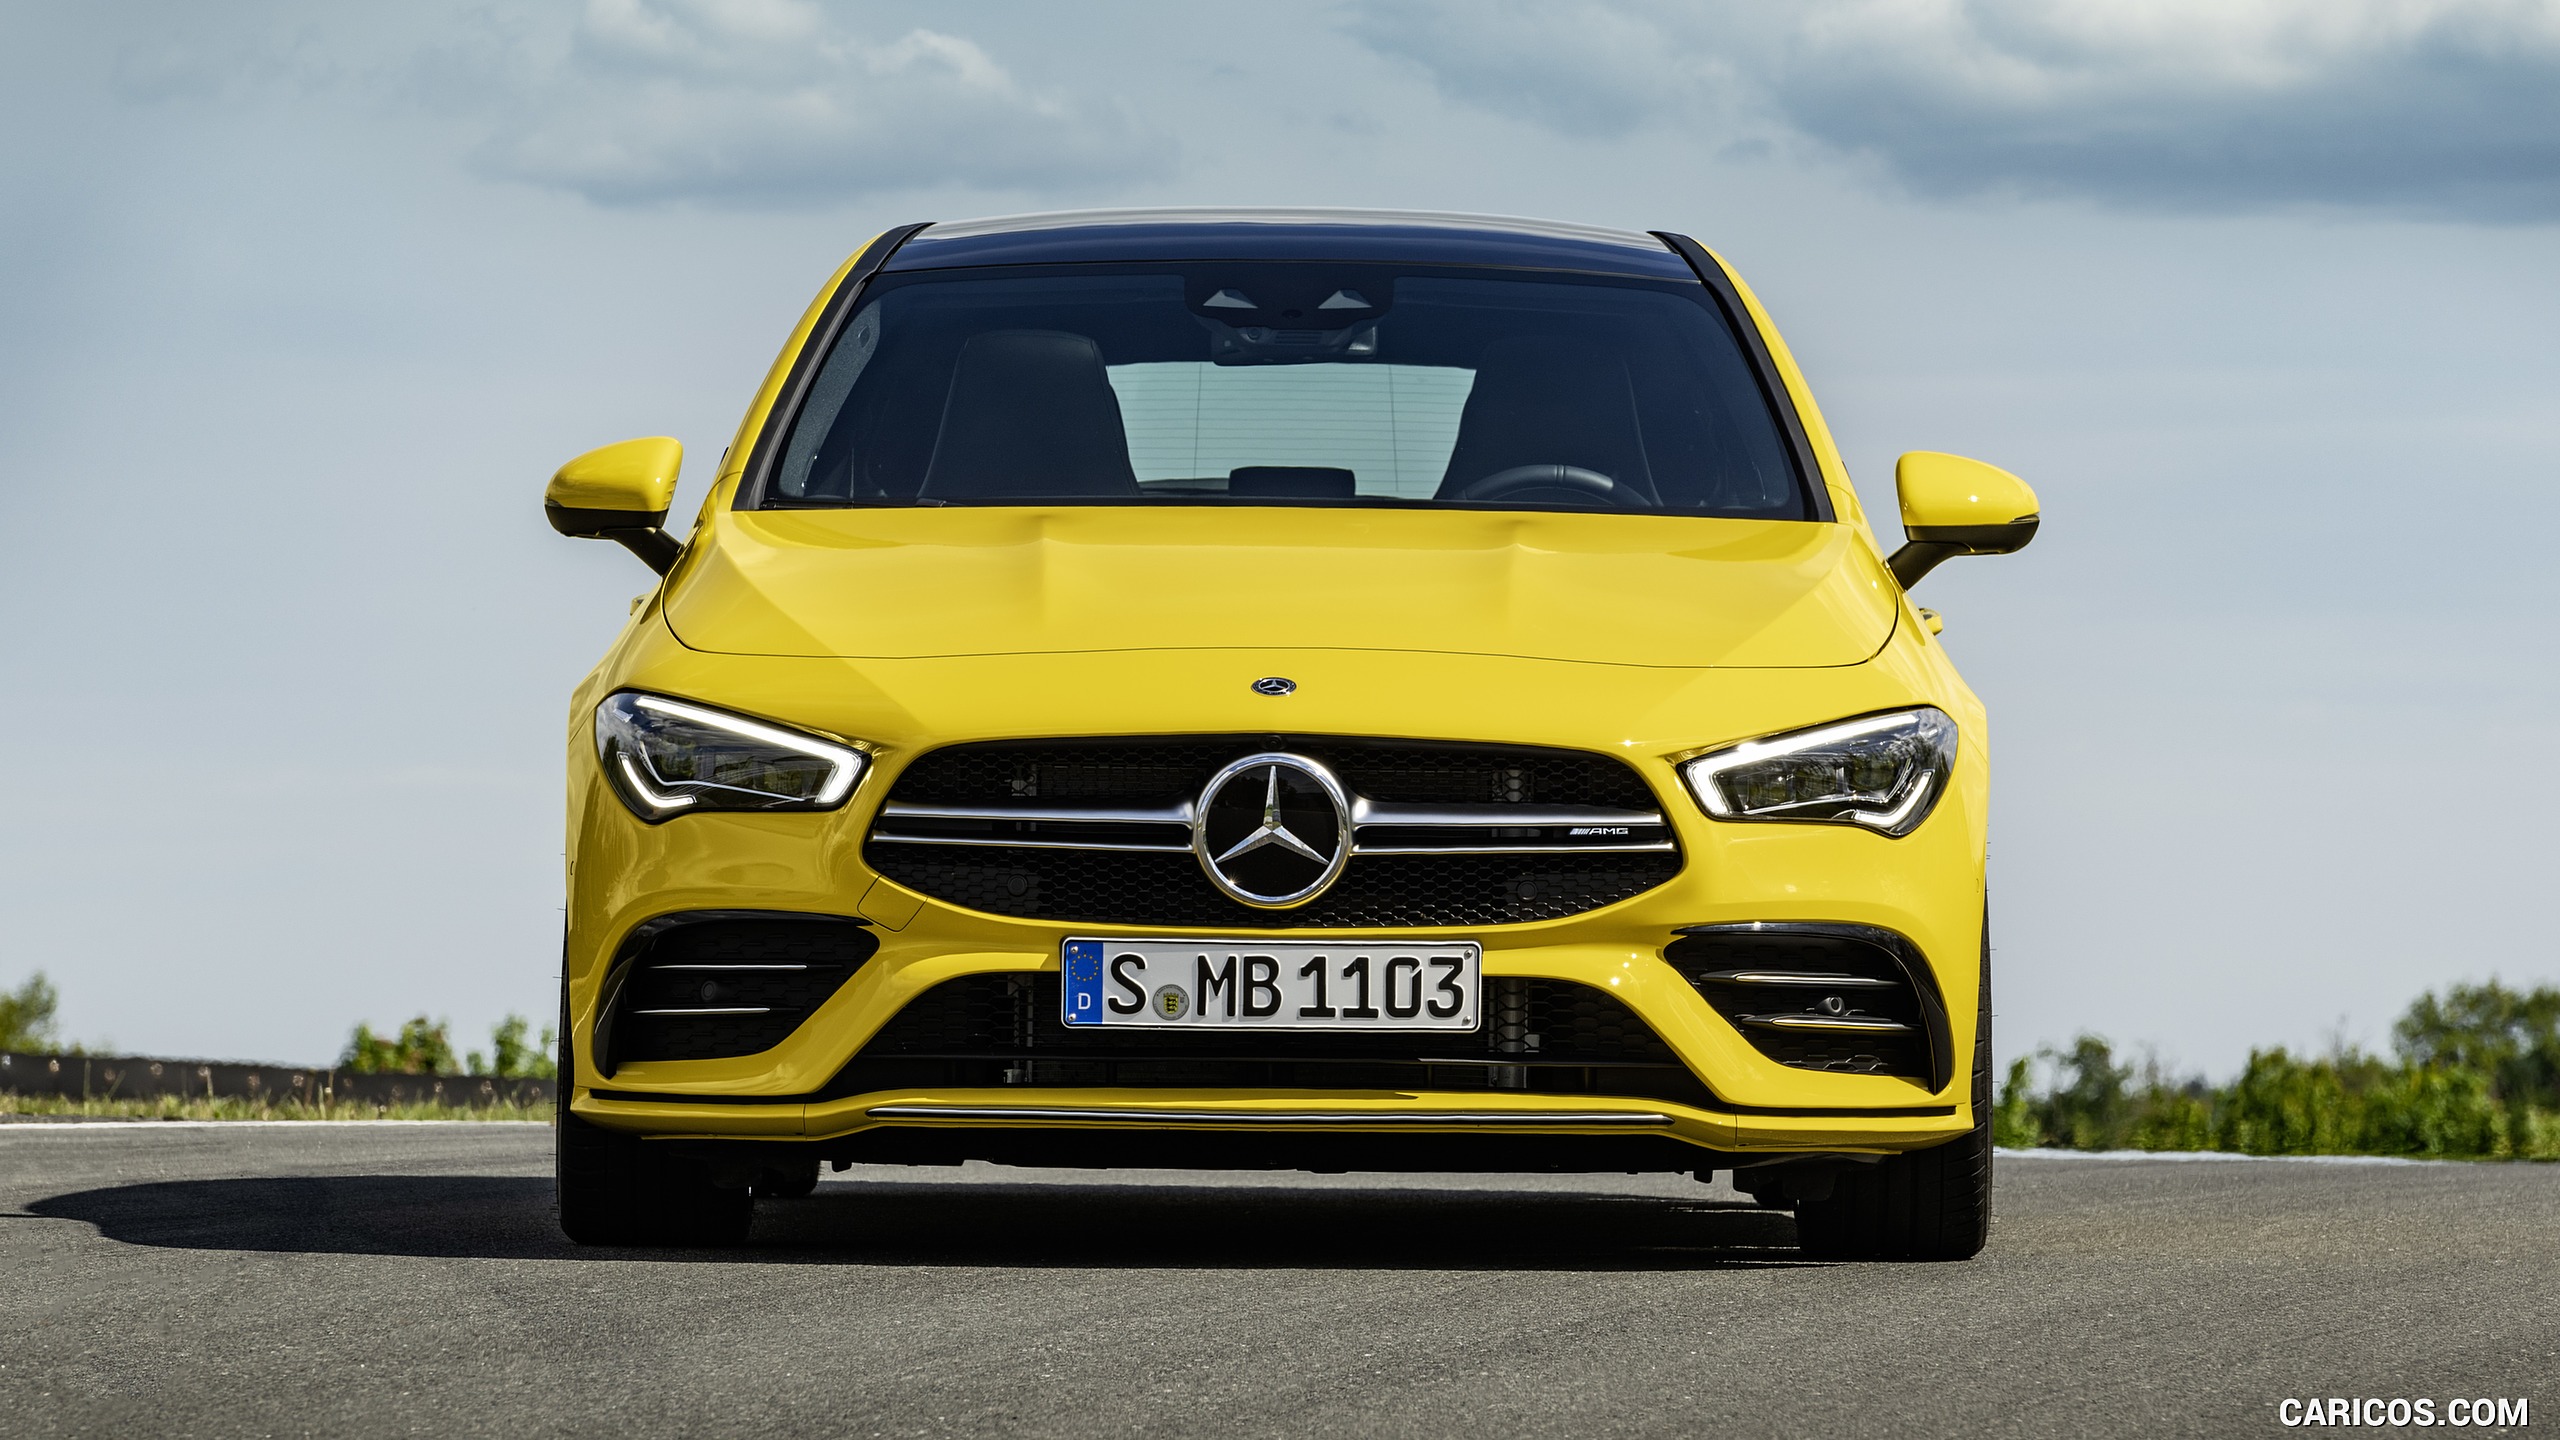 2020 Mercedes-AMG CLA 35 4MATIC Shooting Brake - Front, #16 of 21